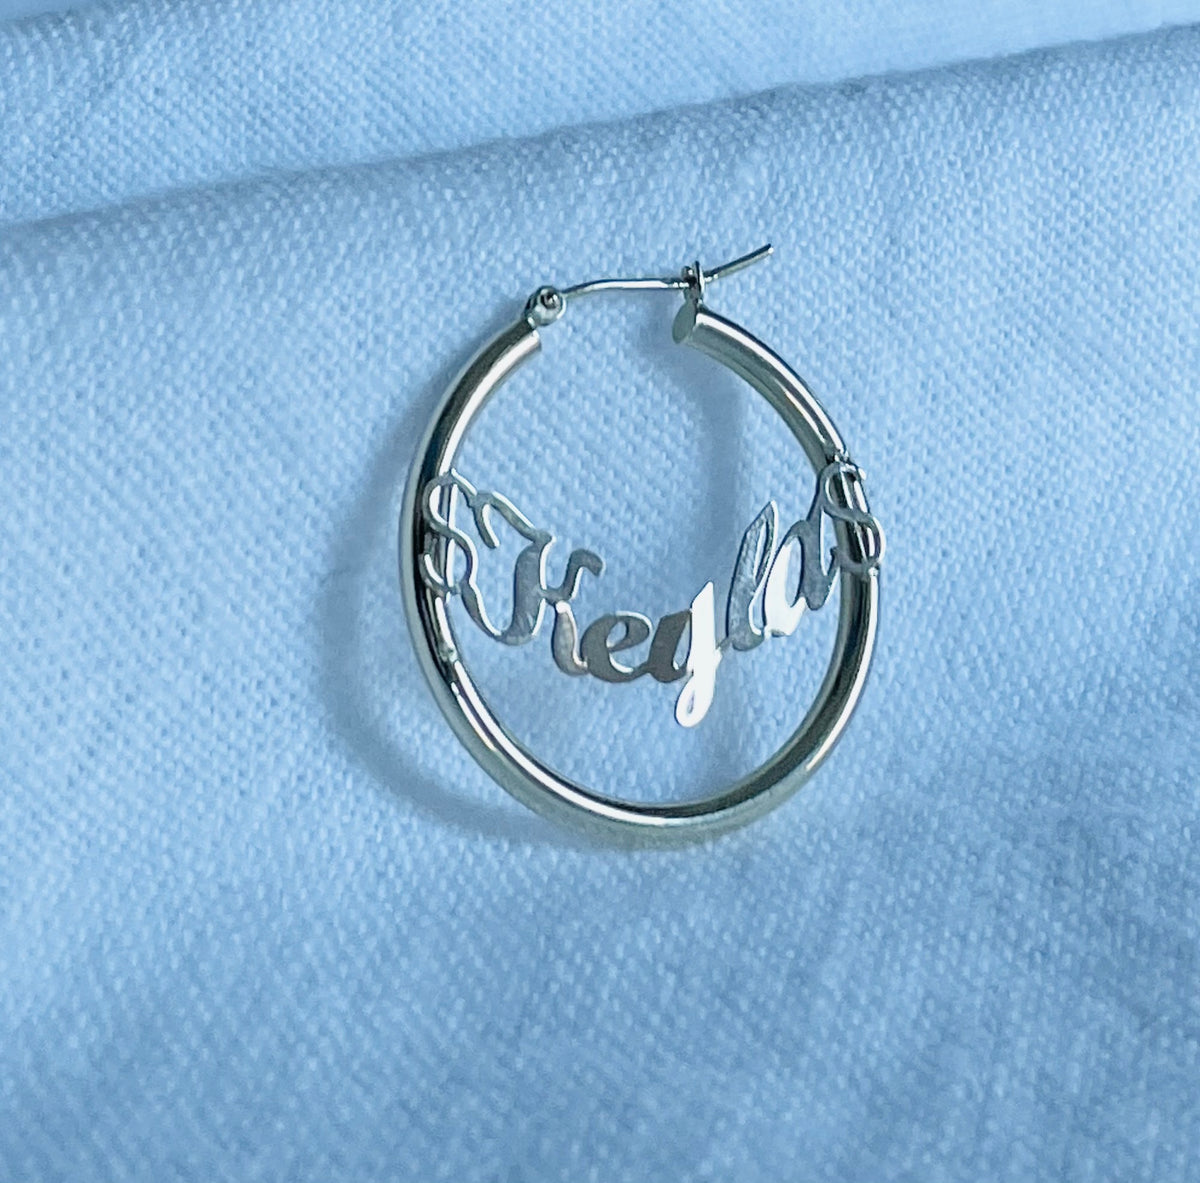 10k Yellow Gold Personalized Hoop Earrings (1.14 inches in diameter)